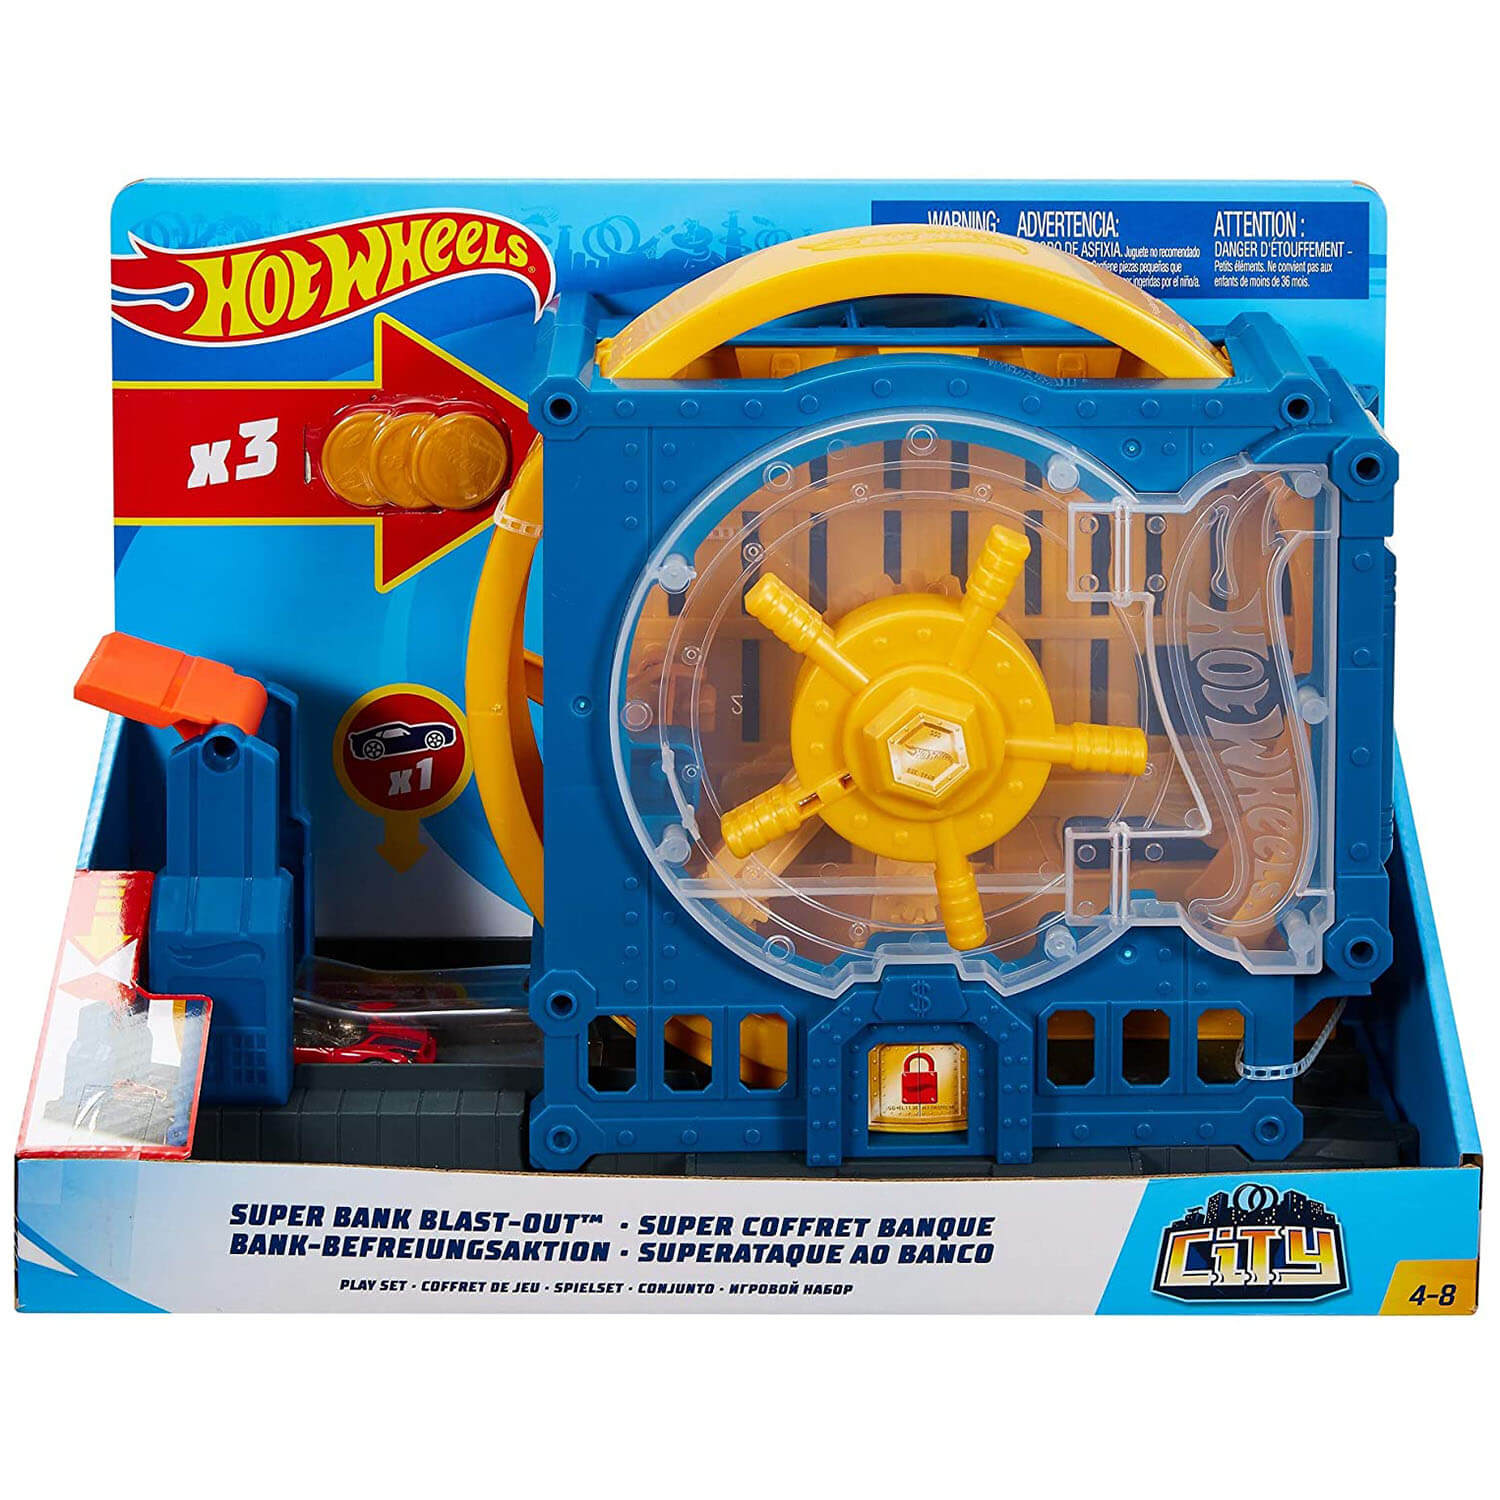 Front view of the Hot Wheels City Super Bank Black-Out Play Set package.